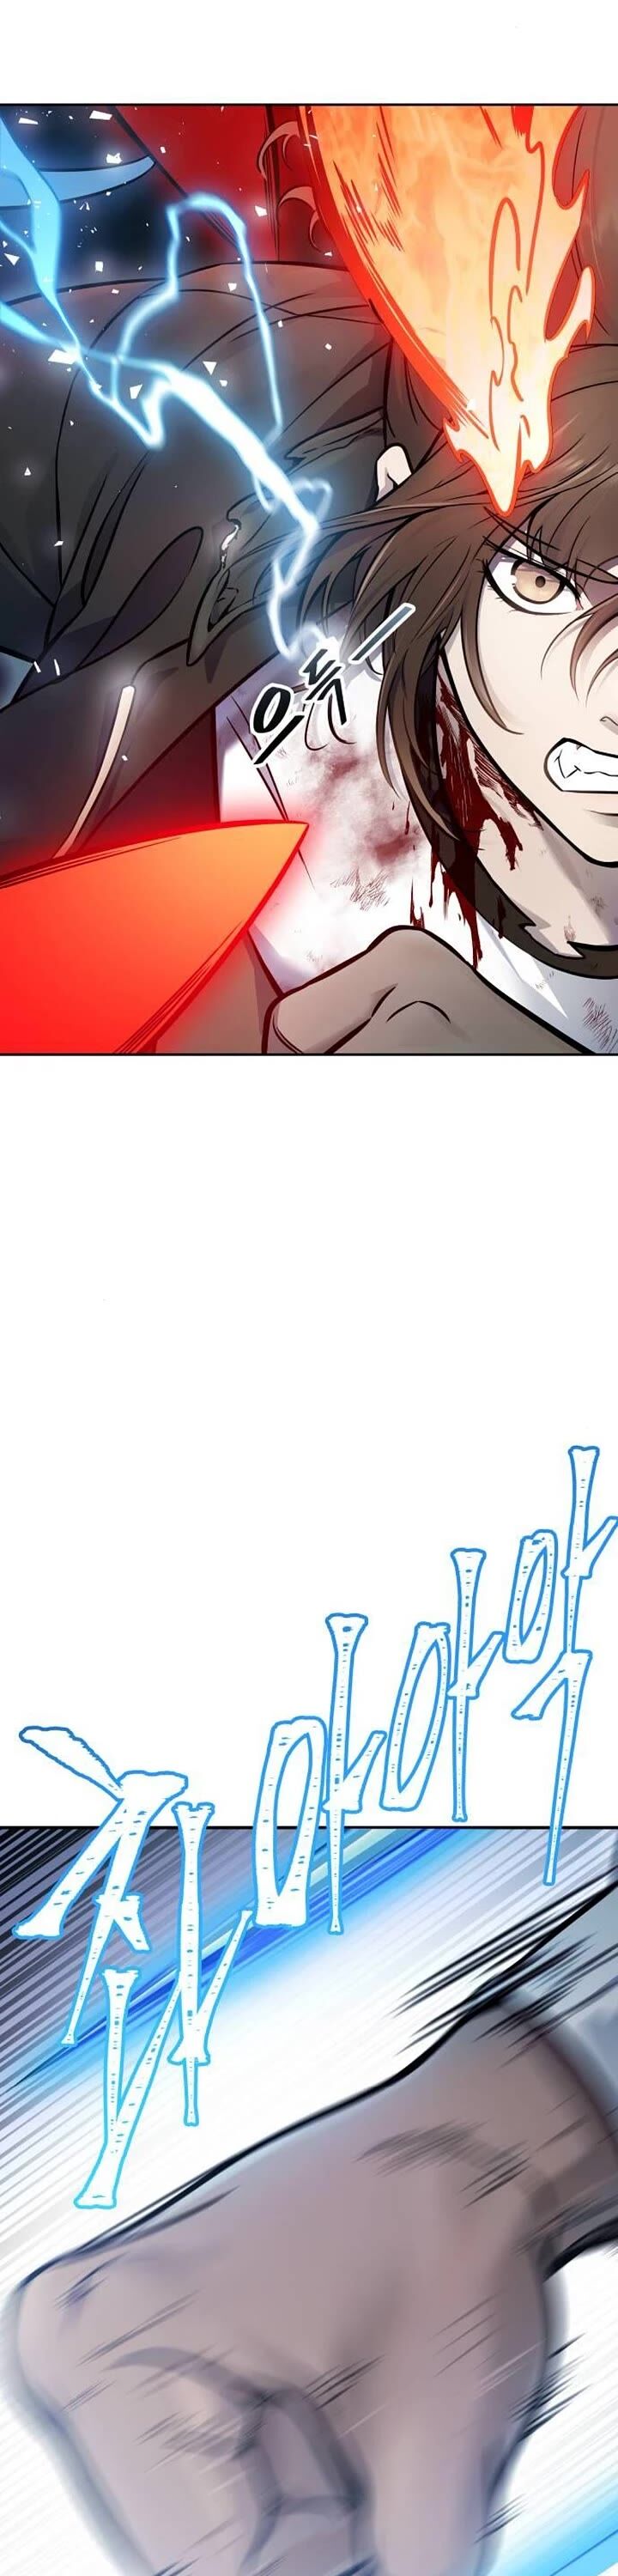 Tower Of God 624 19